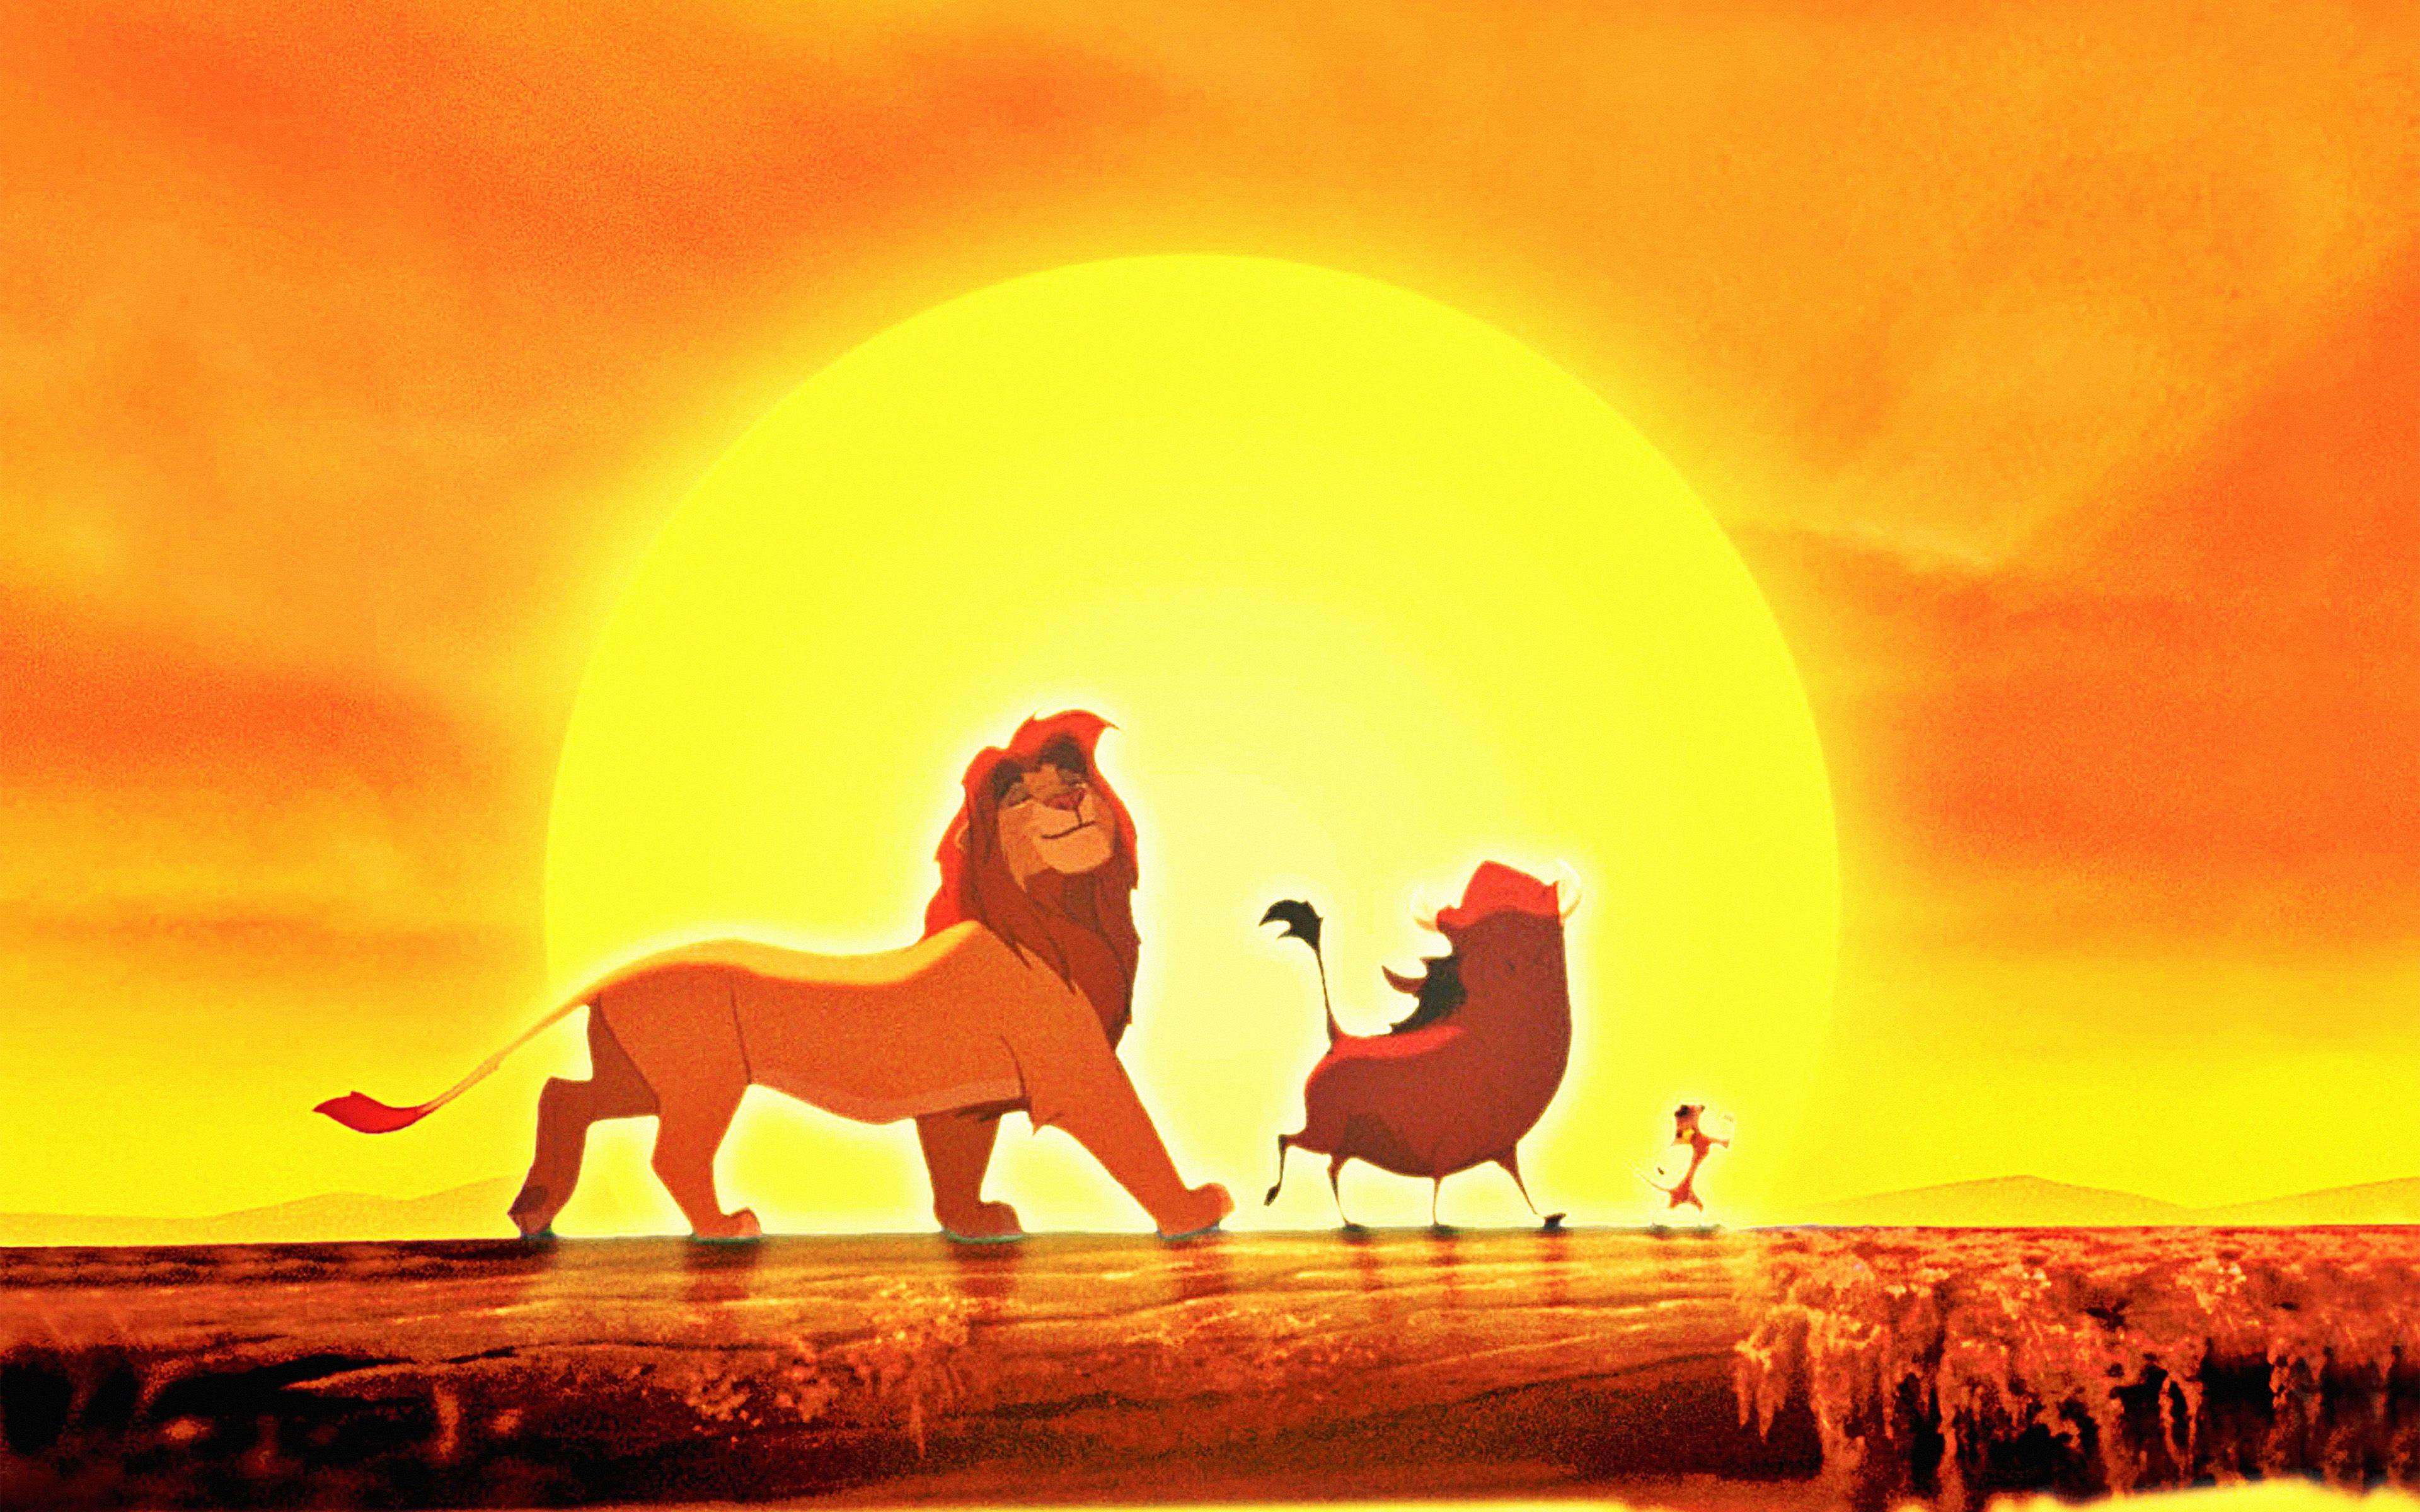 for ios download The Lion King